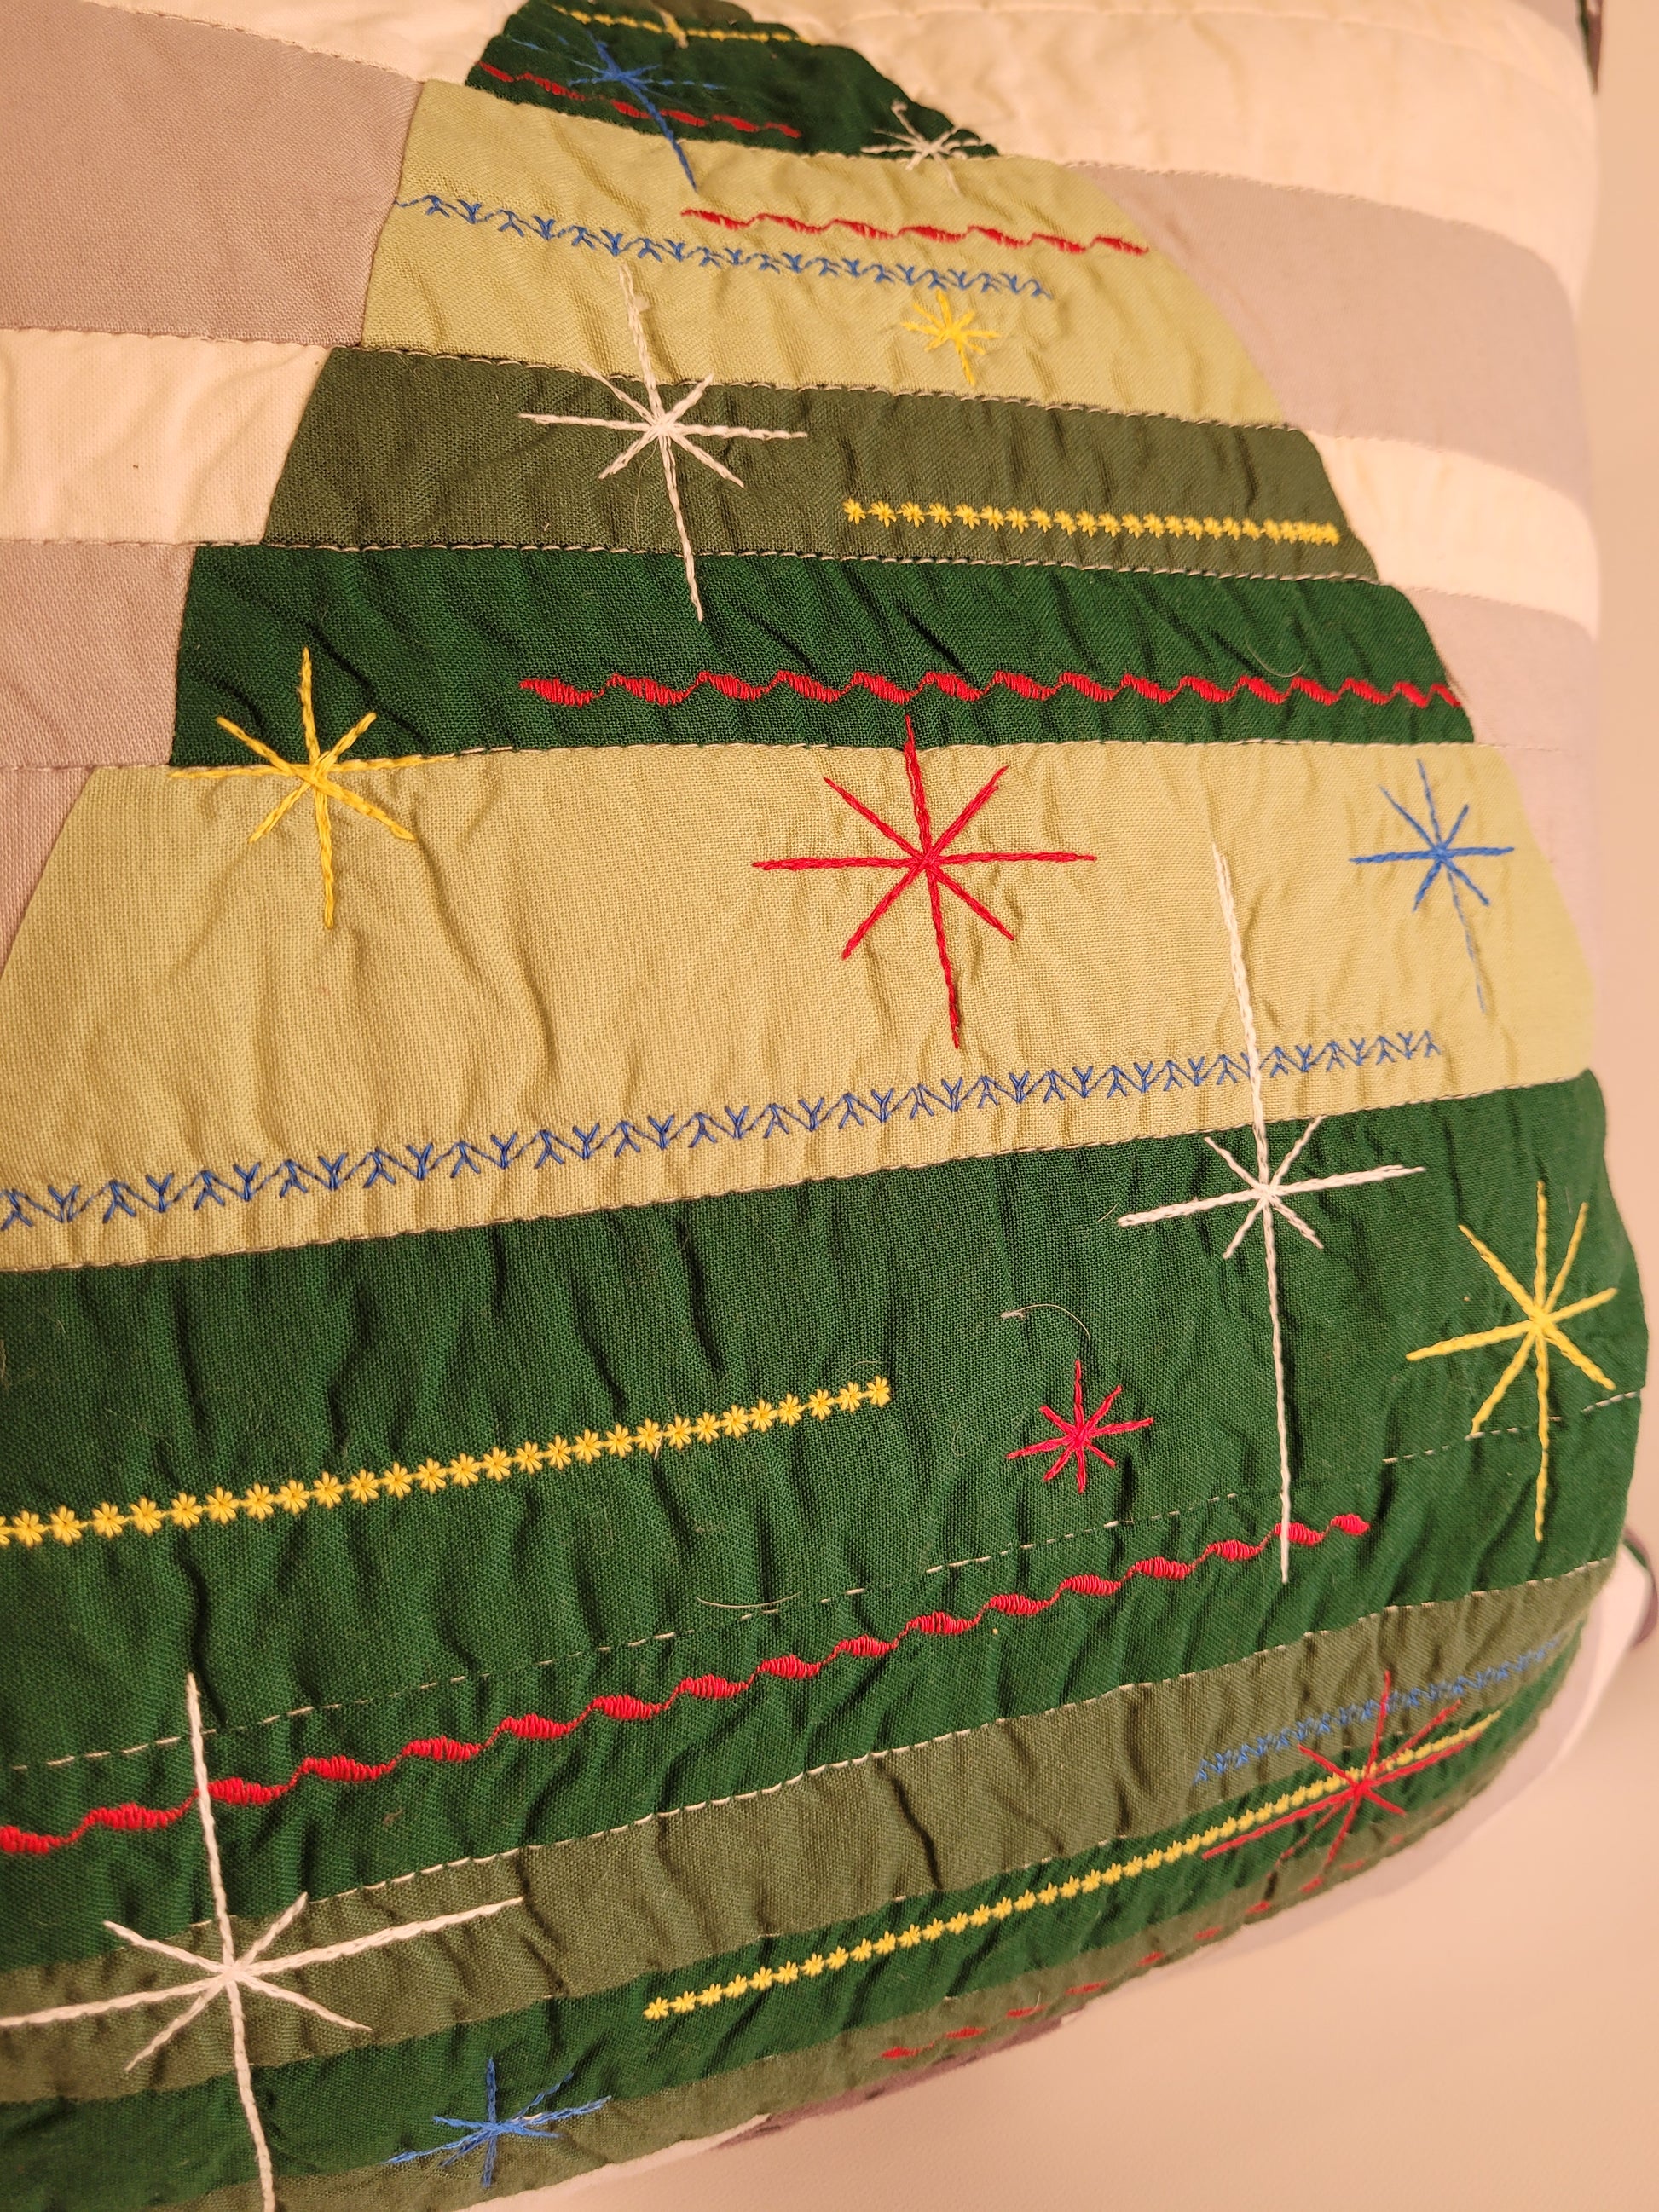 Quilted, Embroidered Mid-Century Kitsch Inspired Christmas Tree Pillow 22"